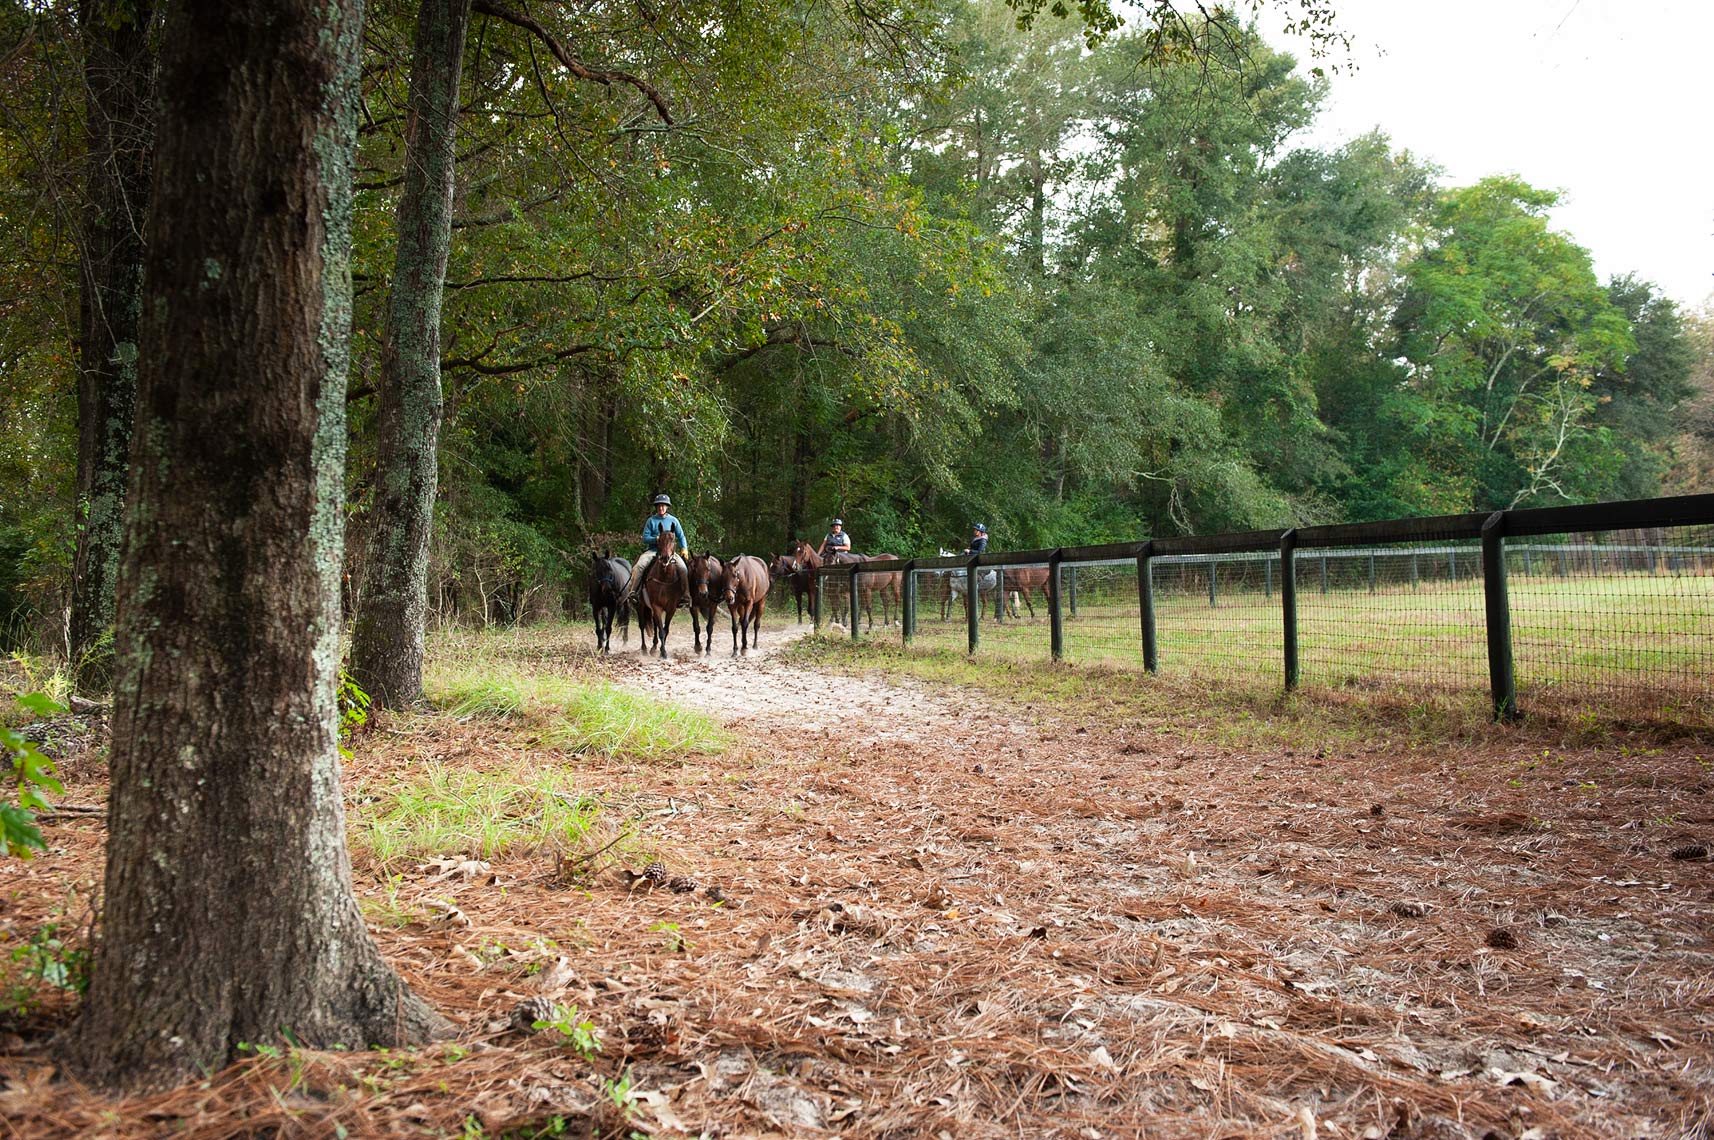 Polo ponies of New Haven Farm going for their morning warmup walk.